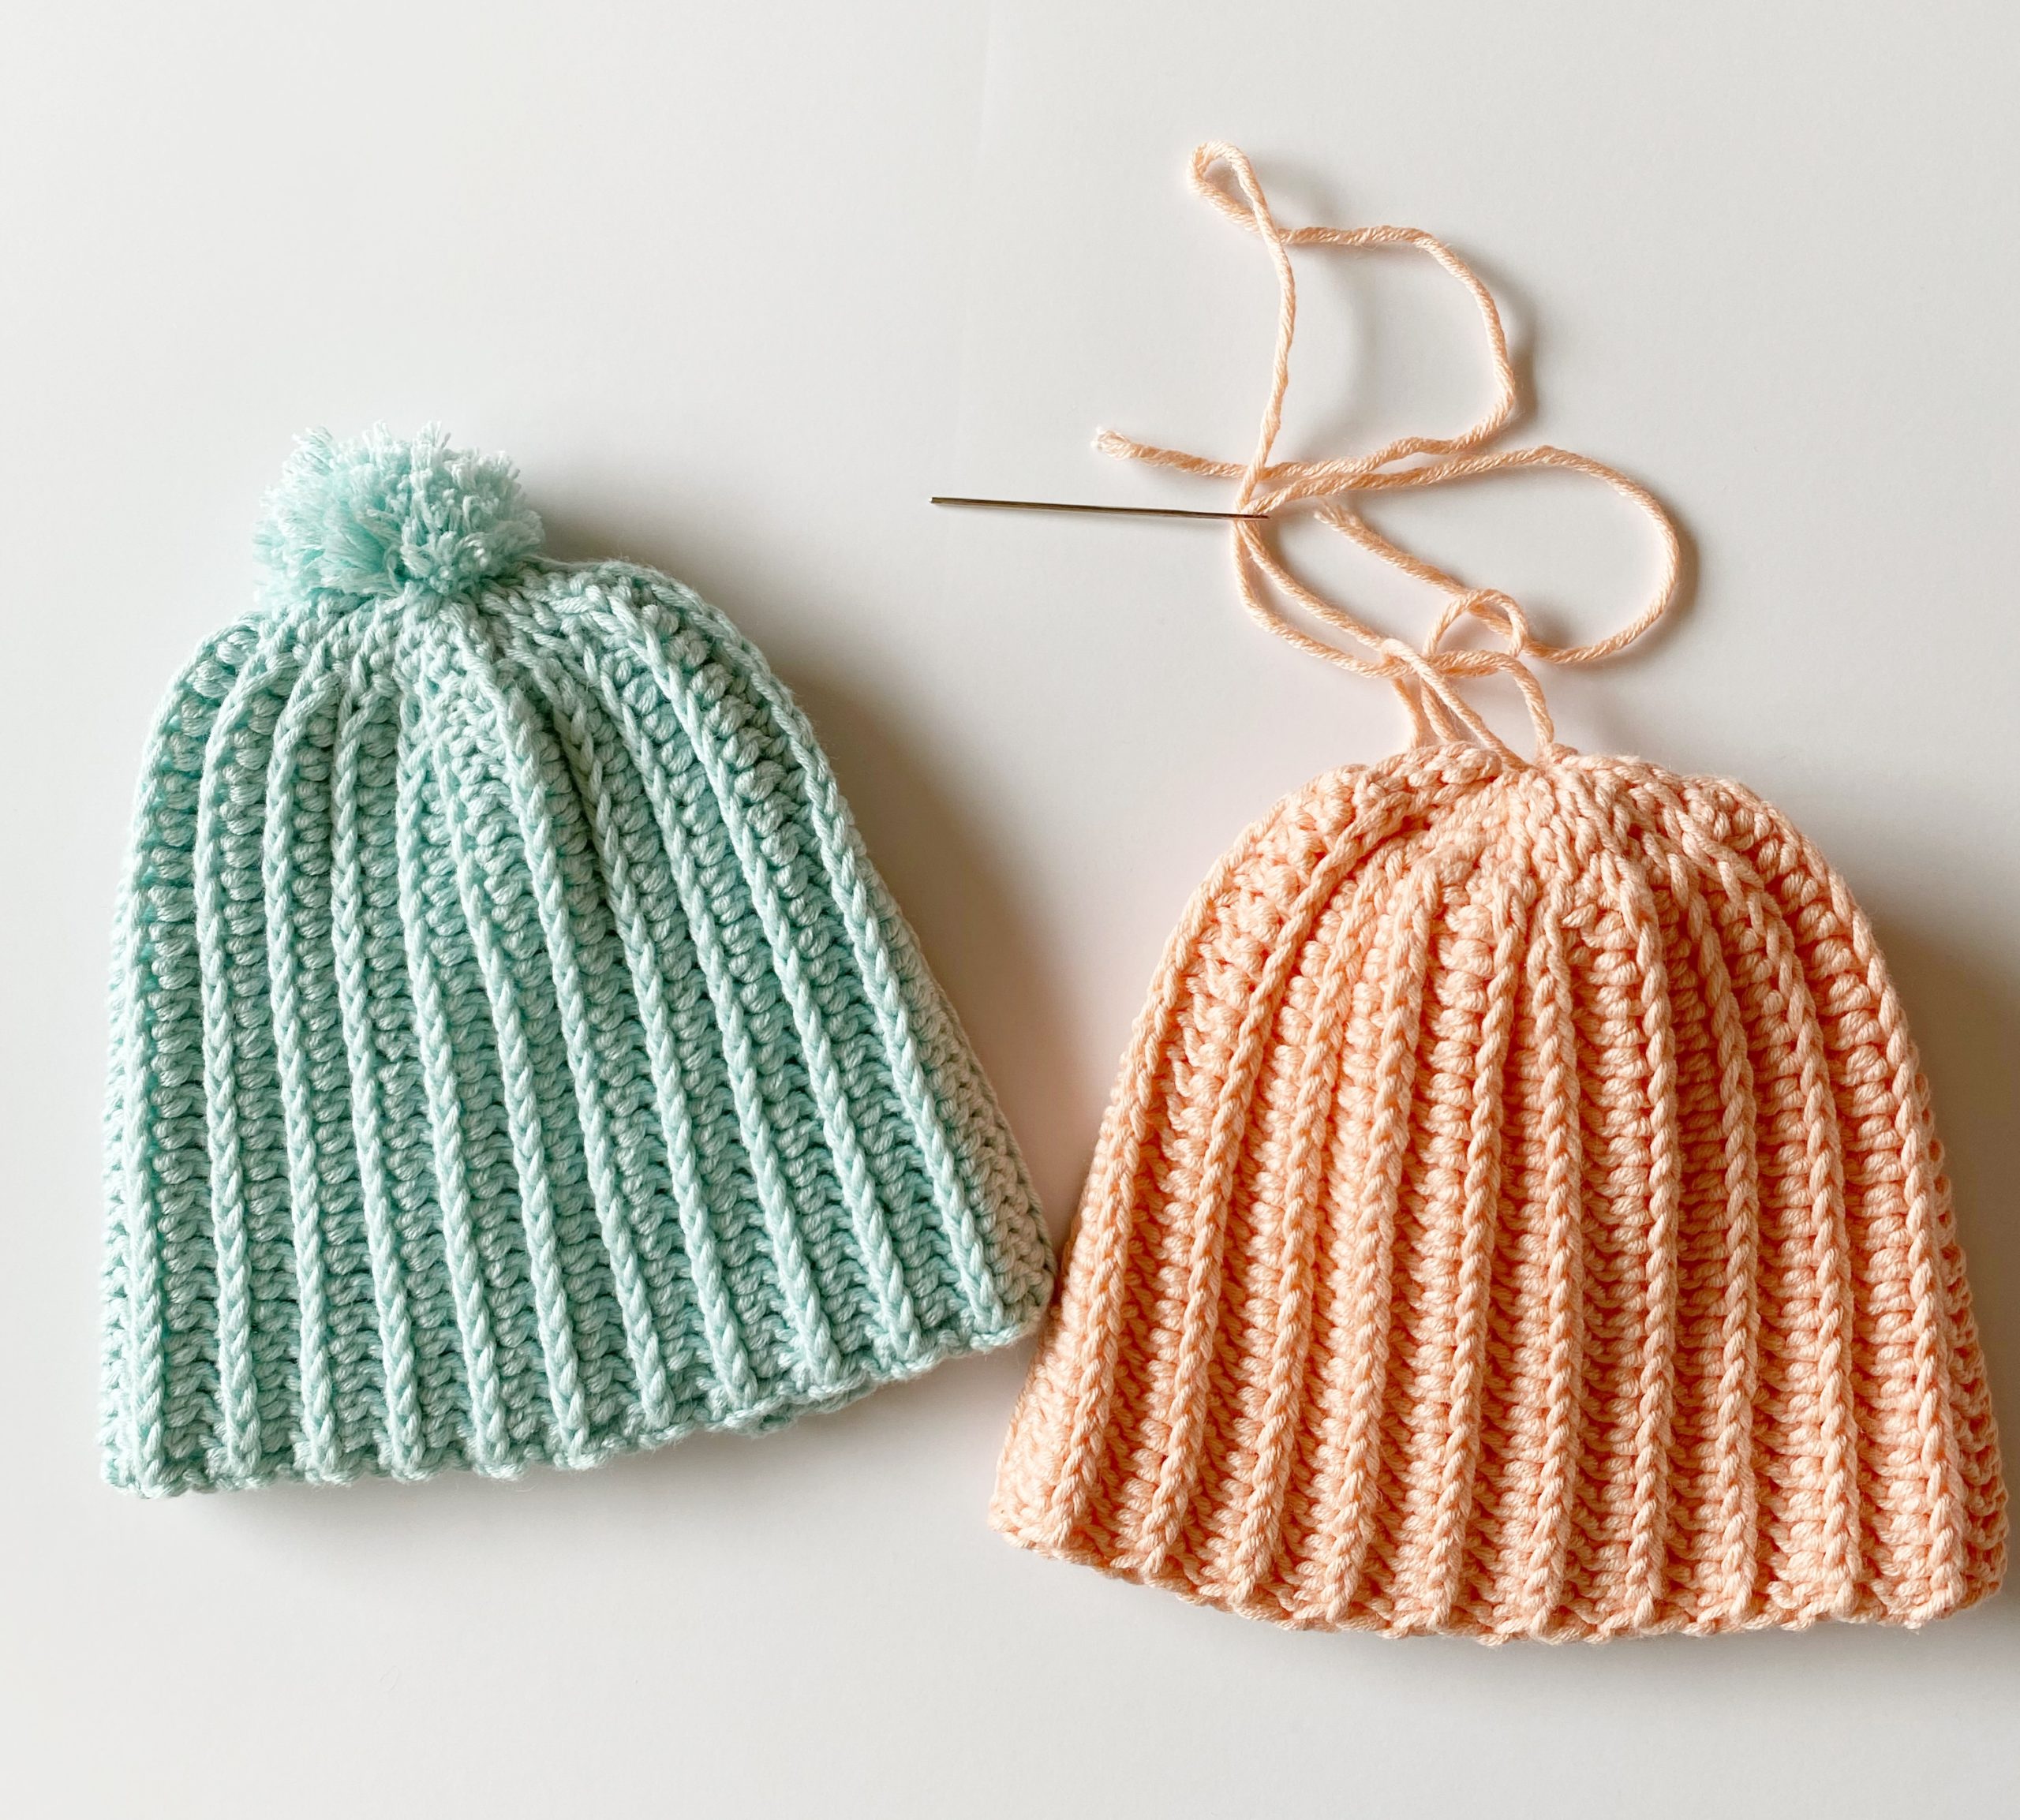 Newborn hats: Keeping Your Little One Stylish and Cozy插图4